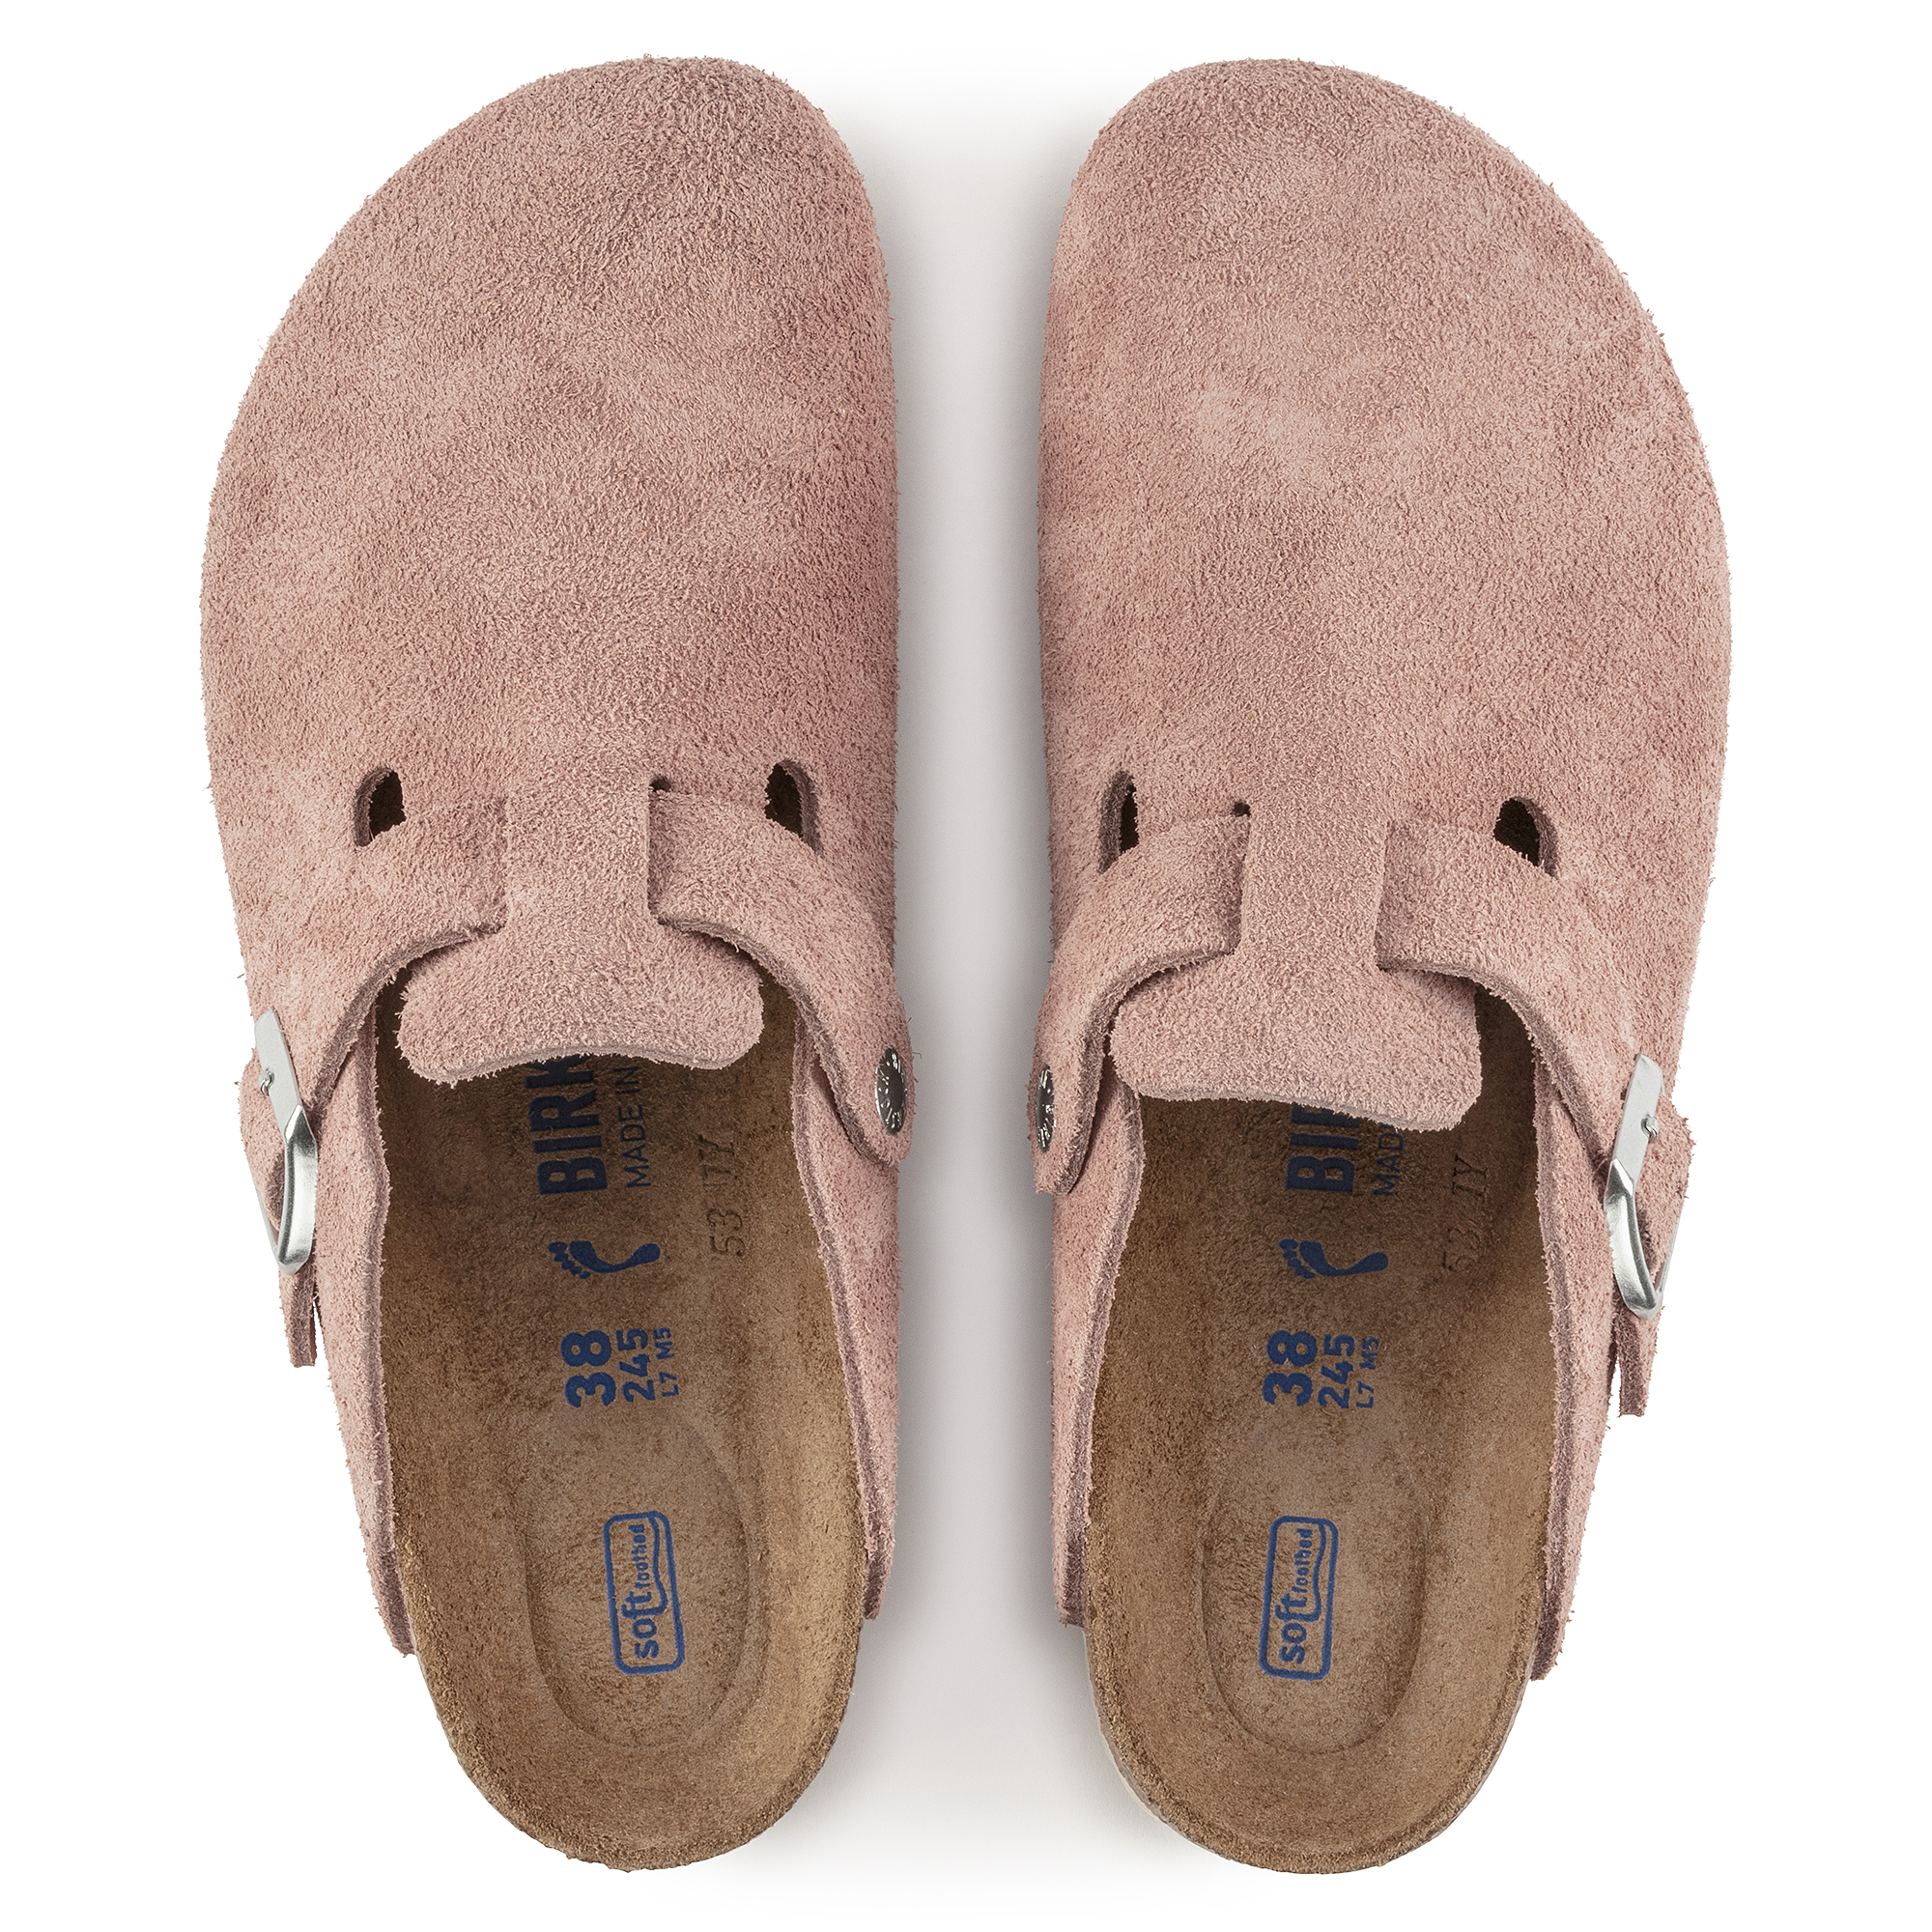 Boston Soft Footbed Suede Leather Pink Clay | BIRKENSTOCK